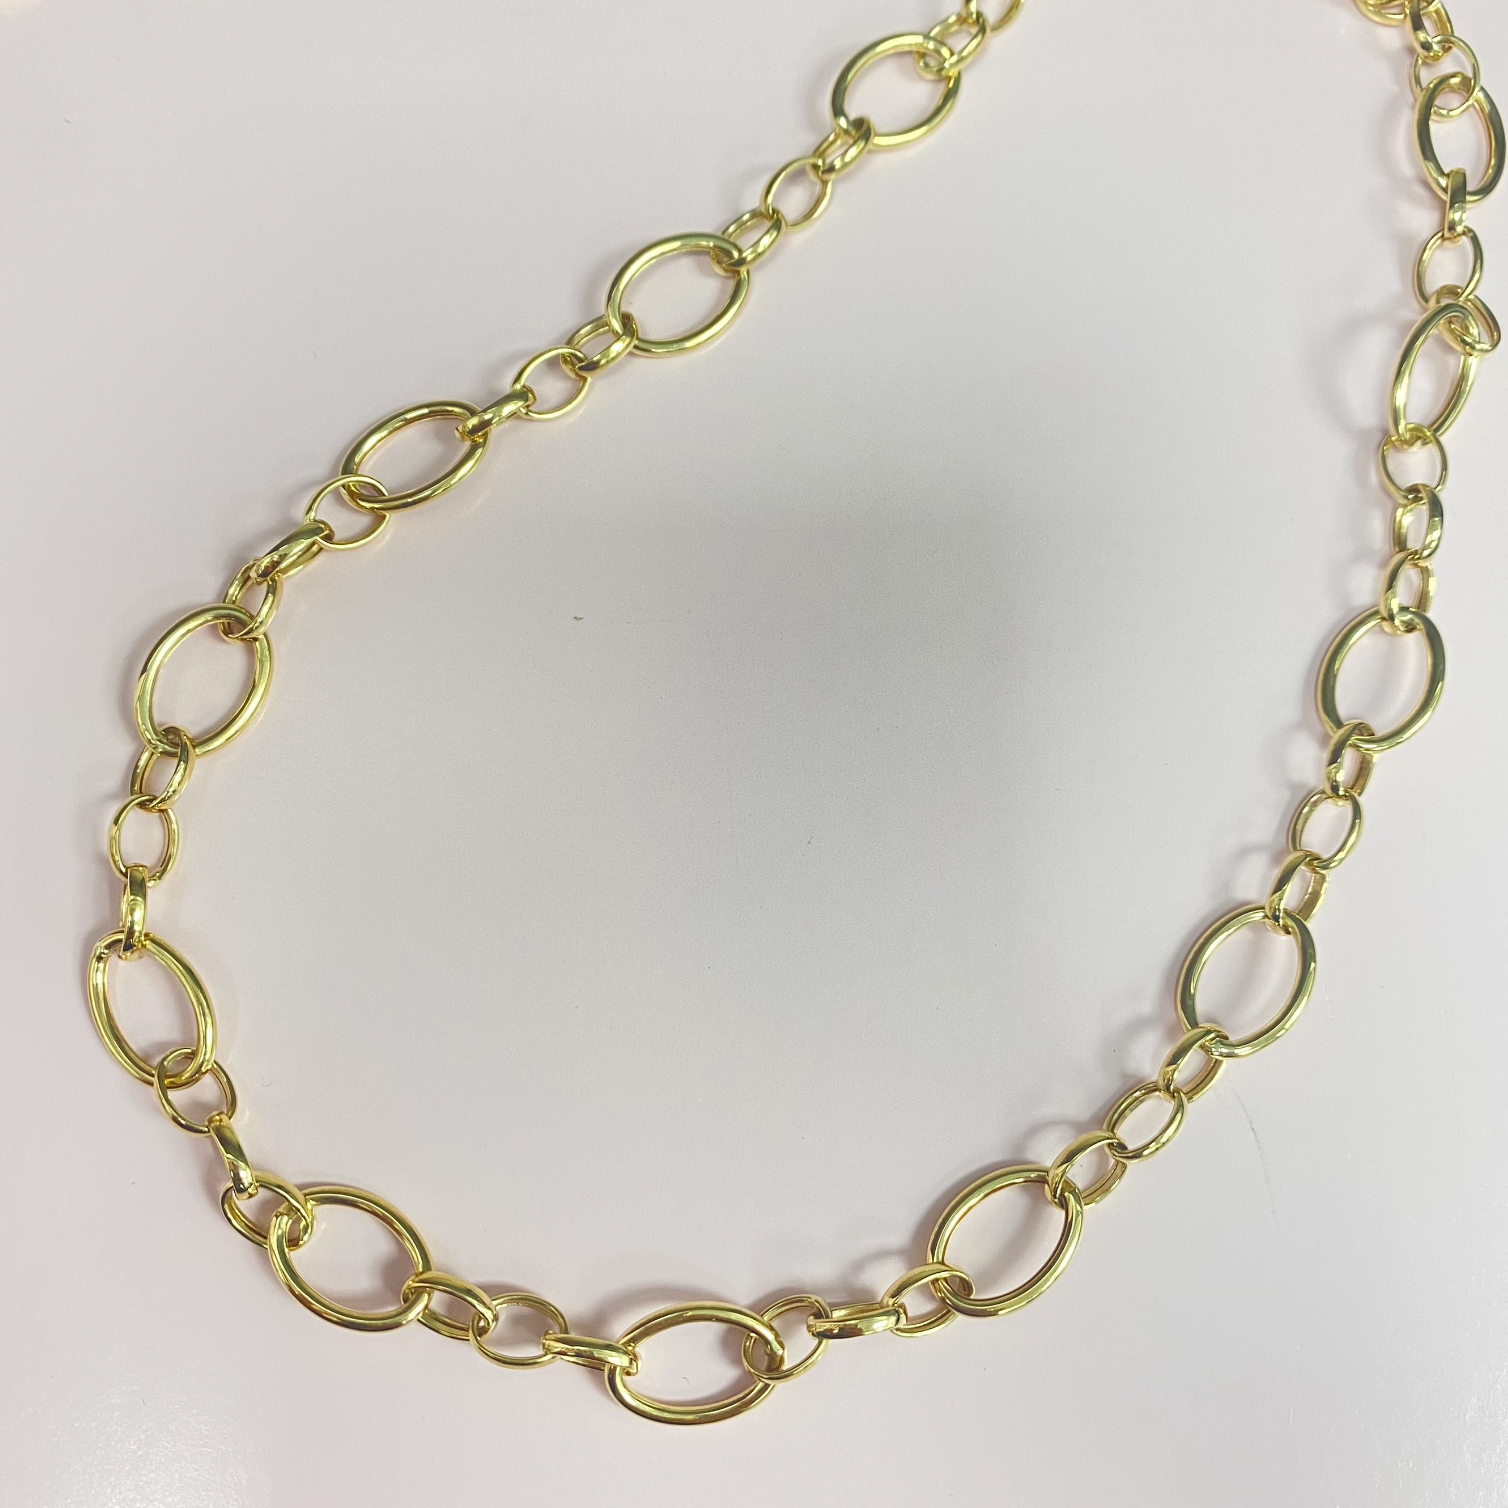 Big and Small Oval Links Necklace